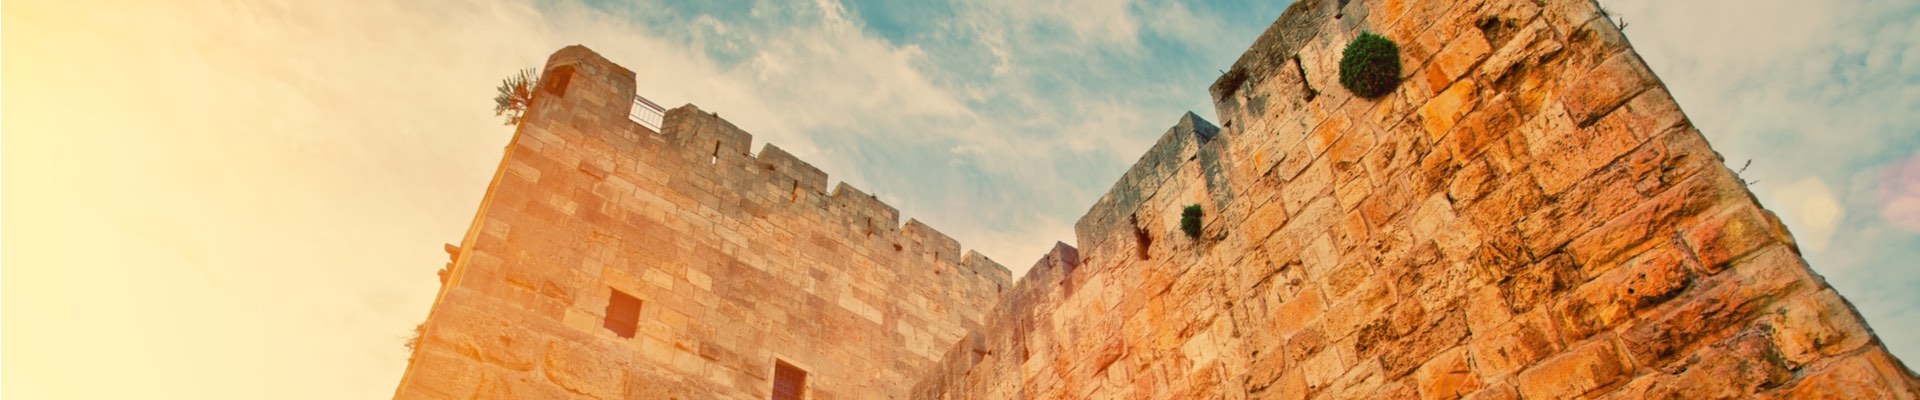 8 Day Jewish Heritage Israel Tour - Small Group Tour